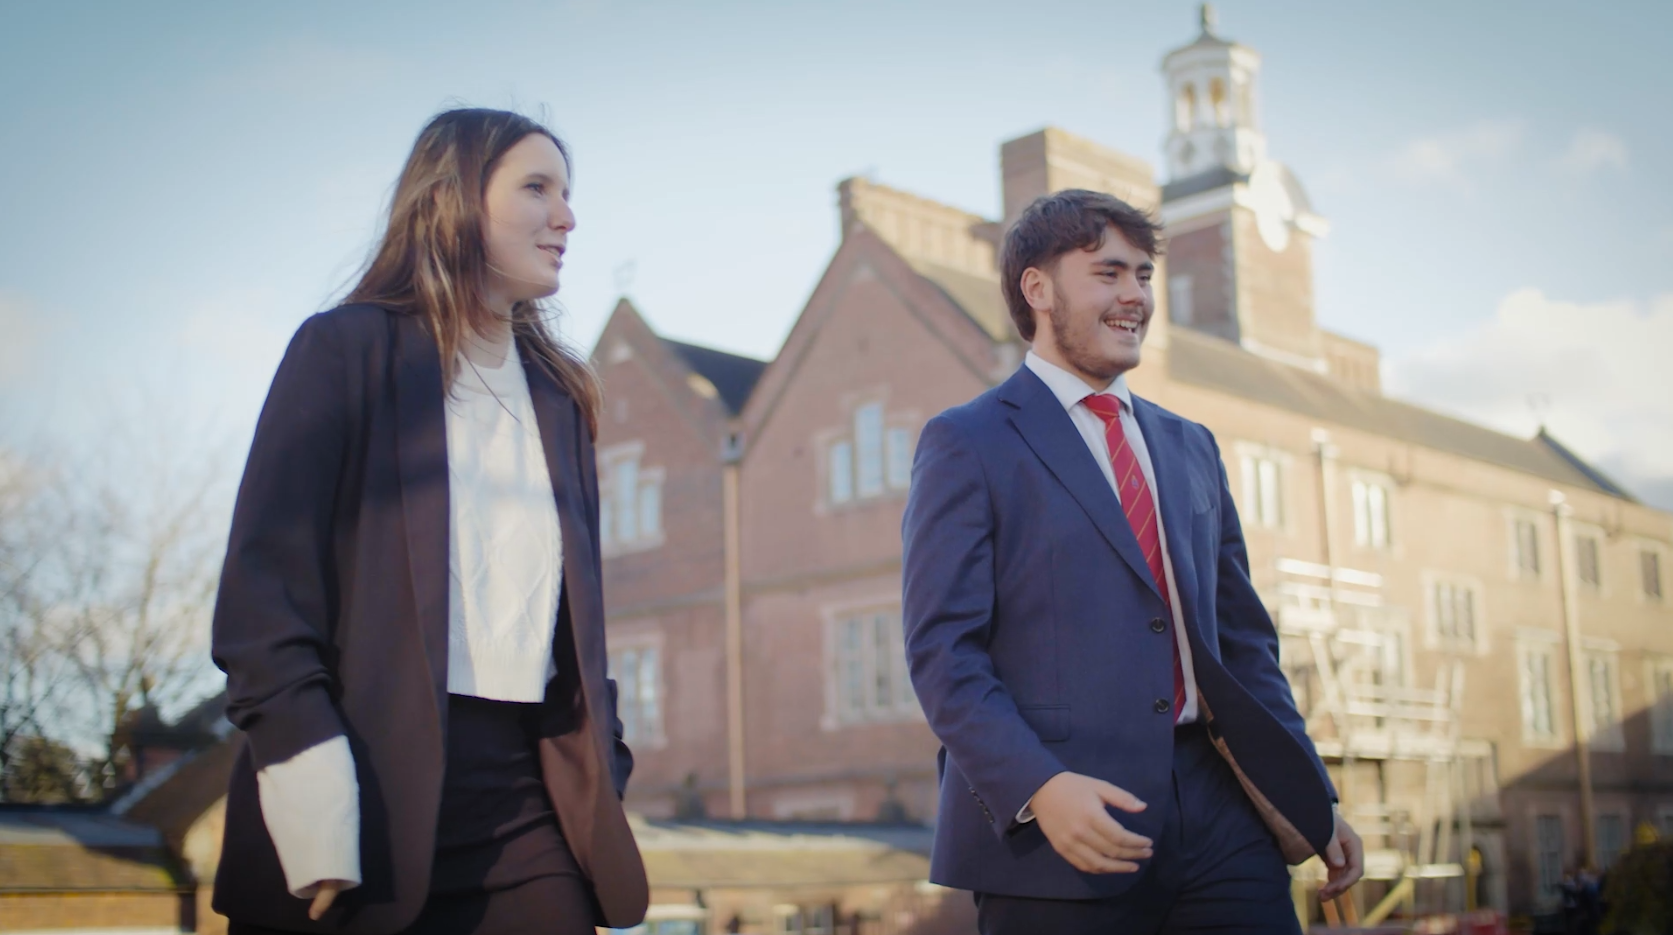 olivia and noah walk side-by-side across school in beautiful, both dressed in suits with trees and founders building behind them